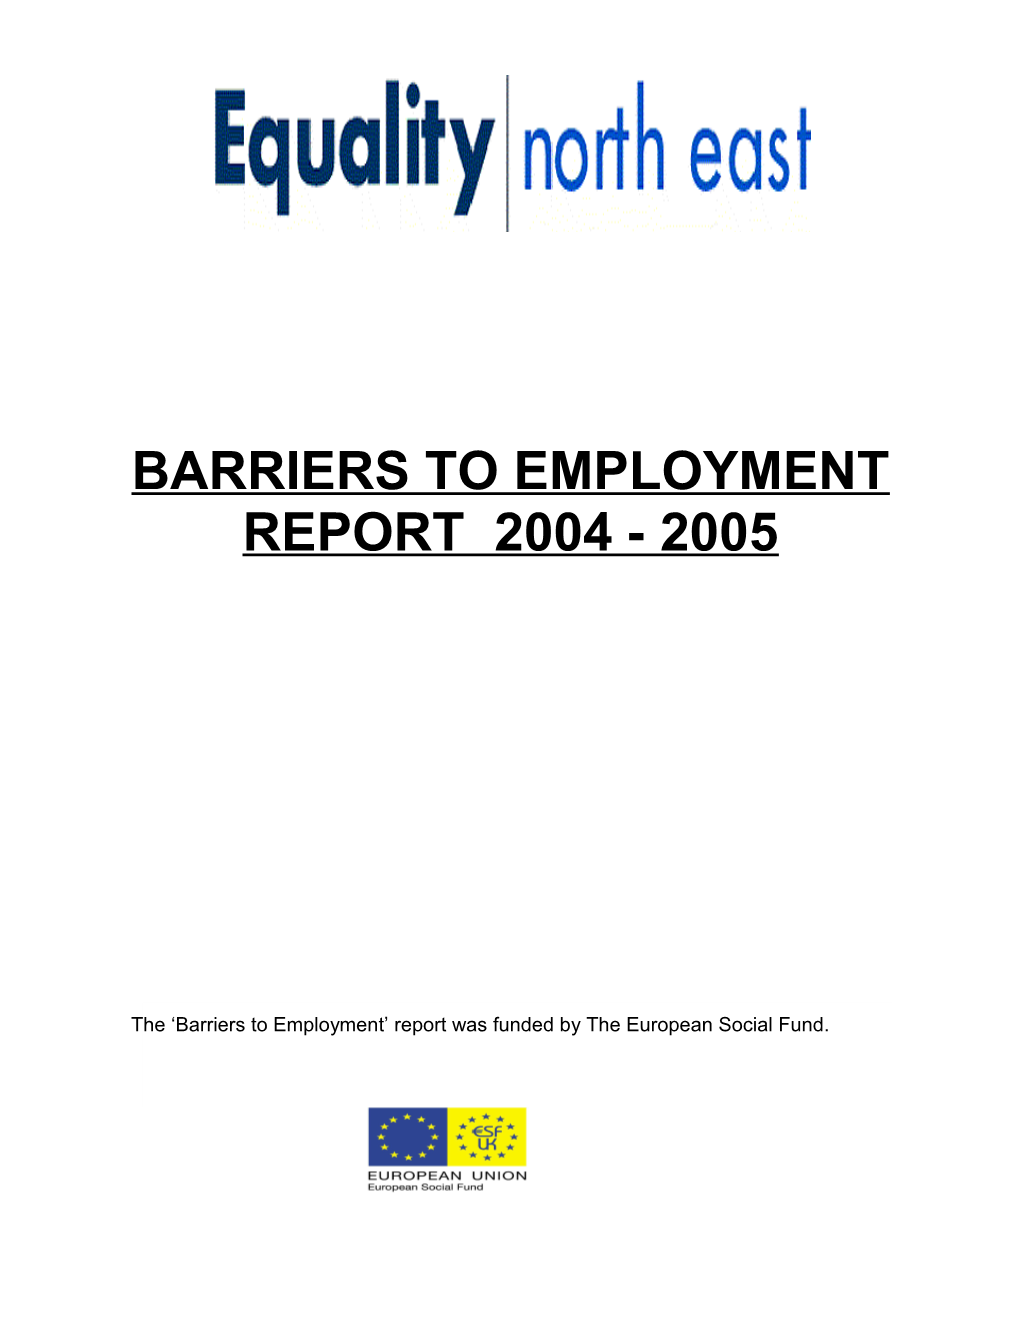 Barriers to Employment